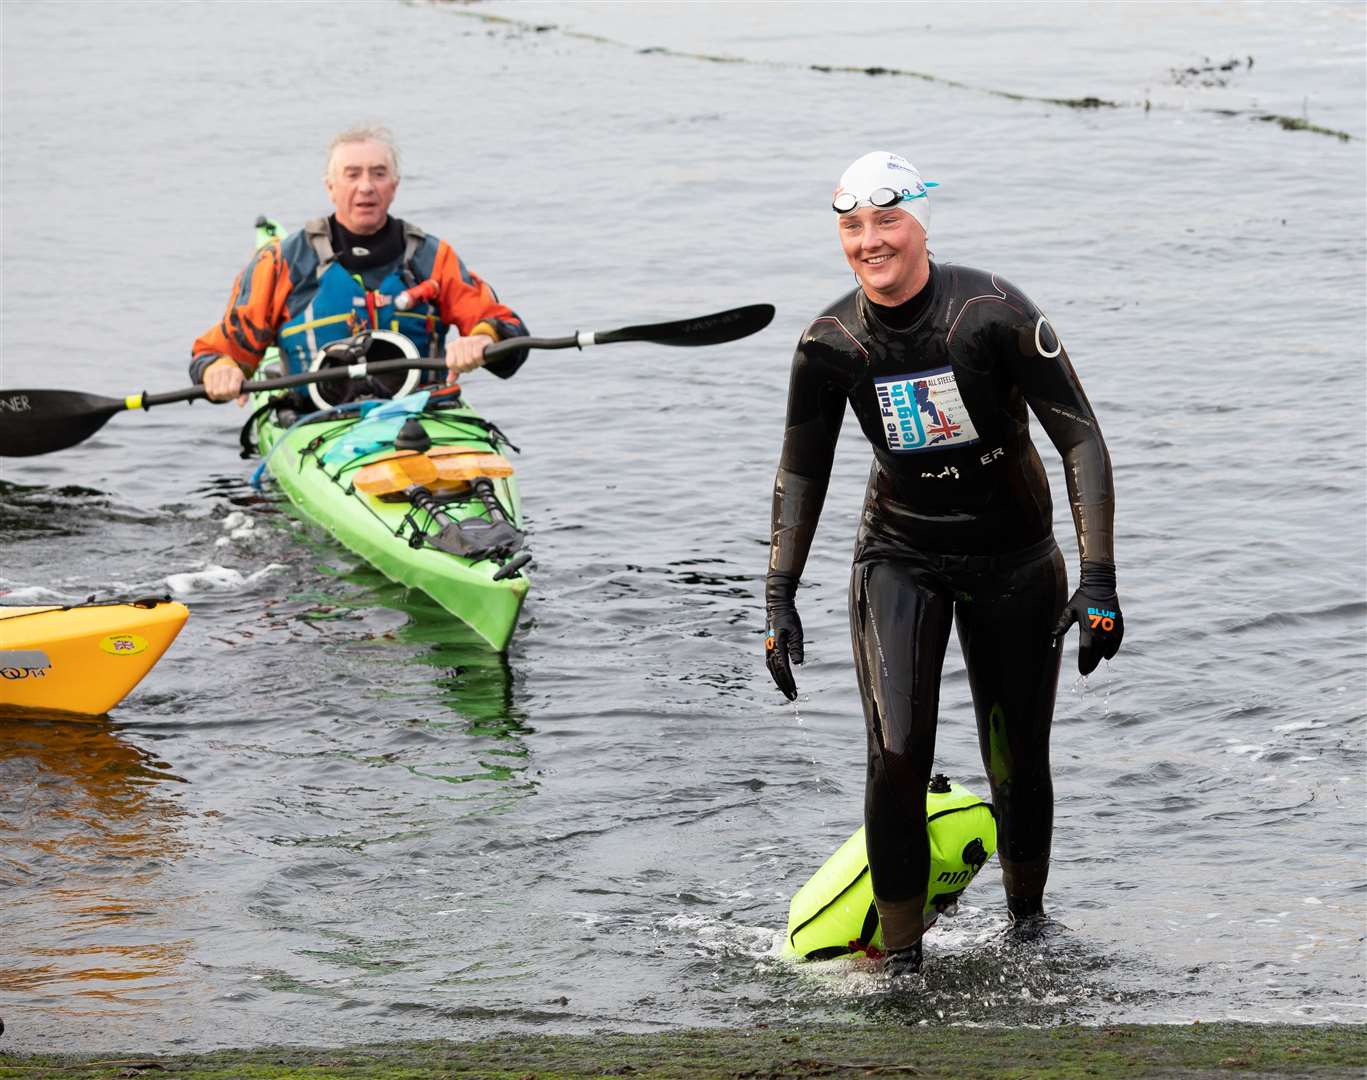 Jasmine Harrison sets foot on dry land at John O'Groats harbour at the end of her record breaking Lejog swim. Picture: Simon Price/Firstpix